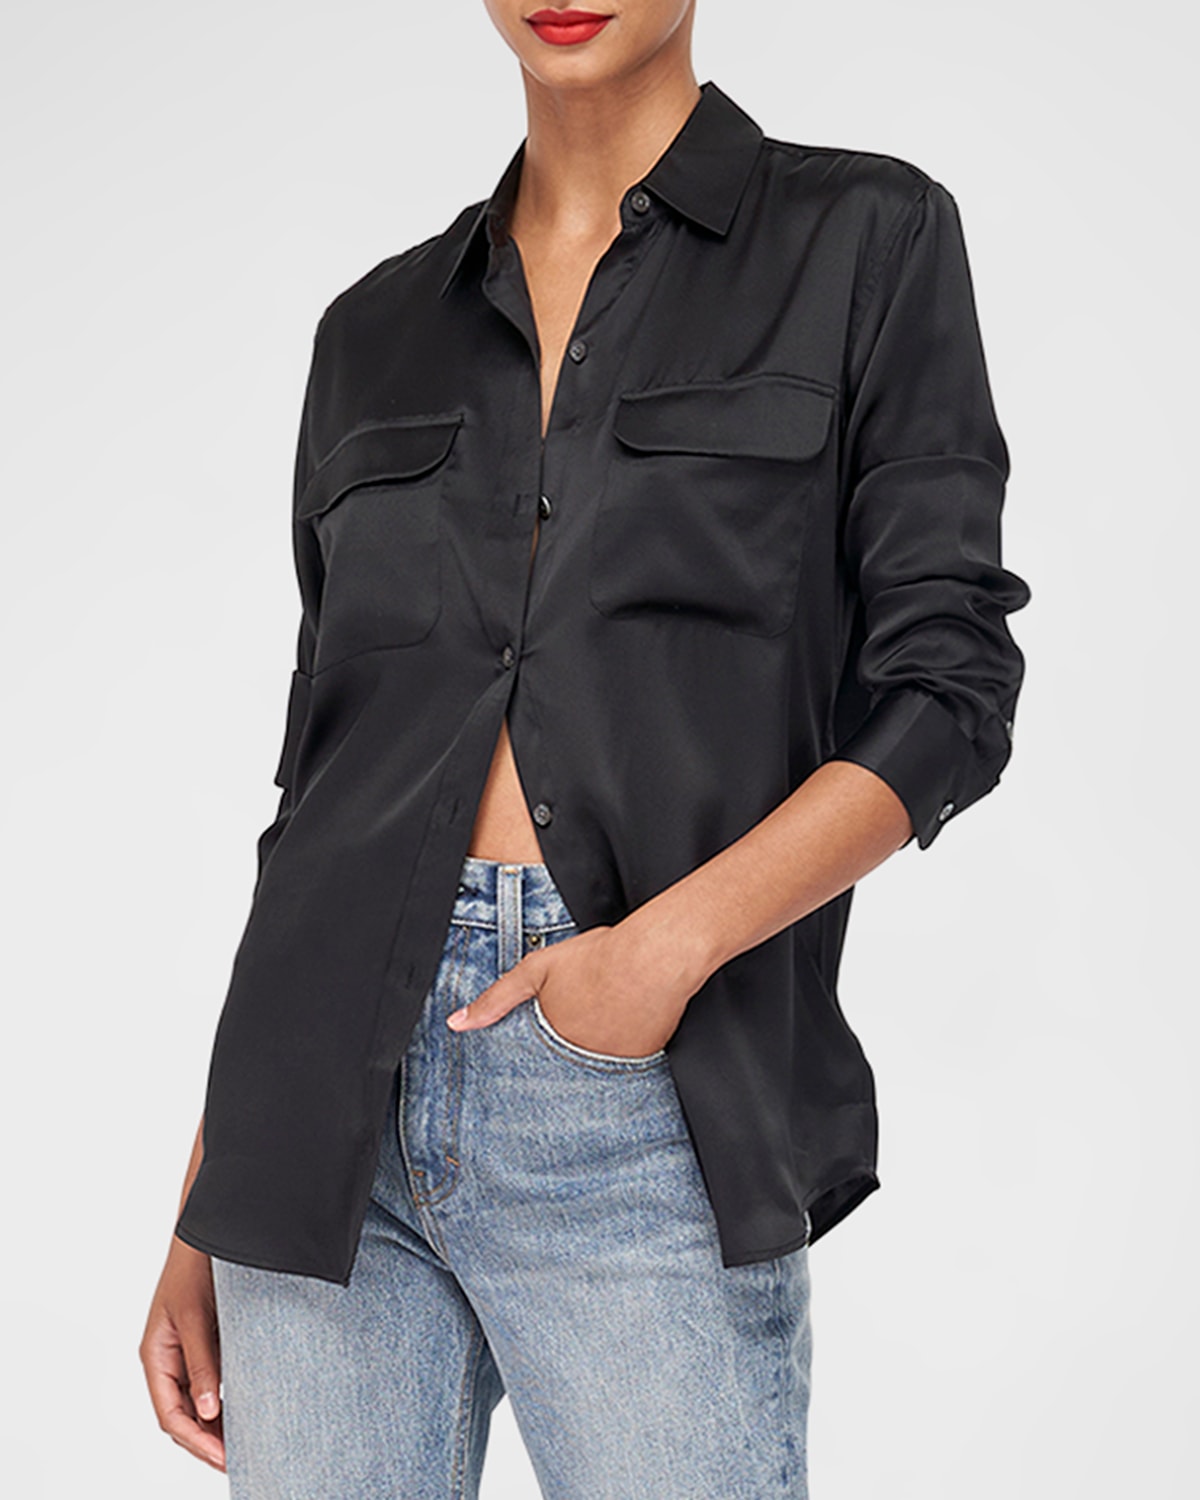 Signature Solid Button-Down Shirt